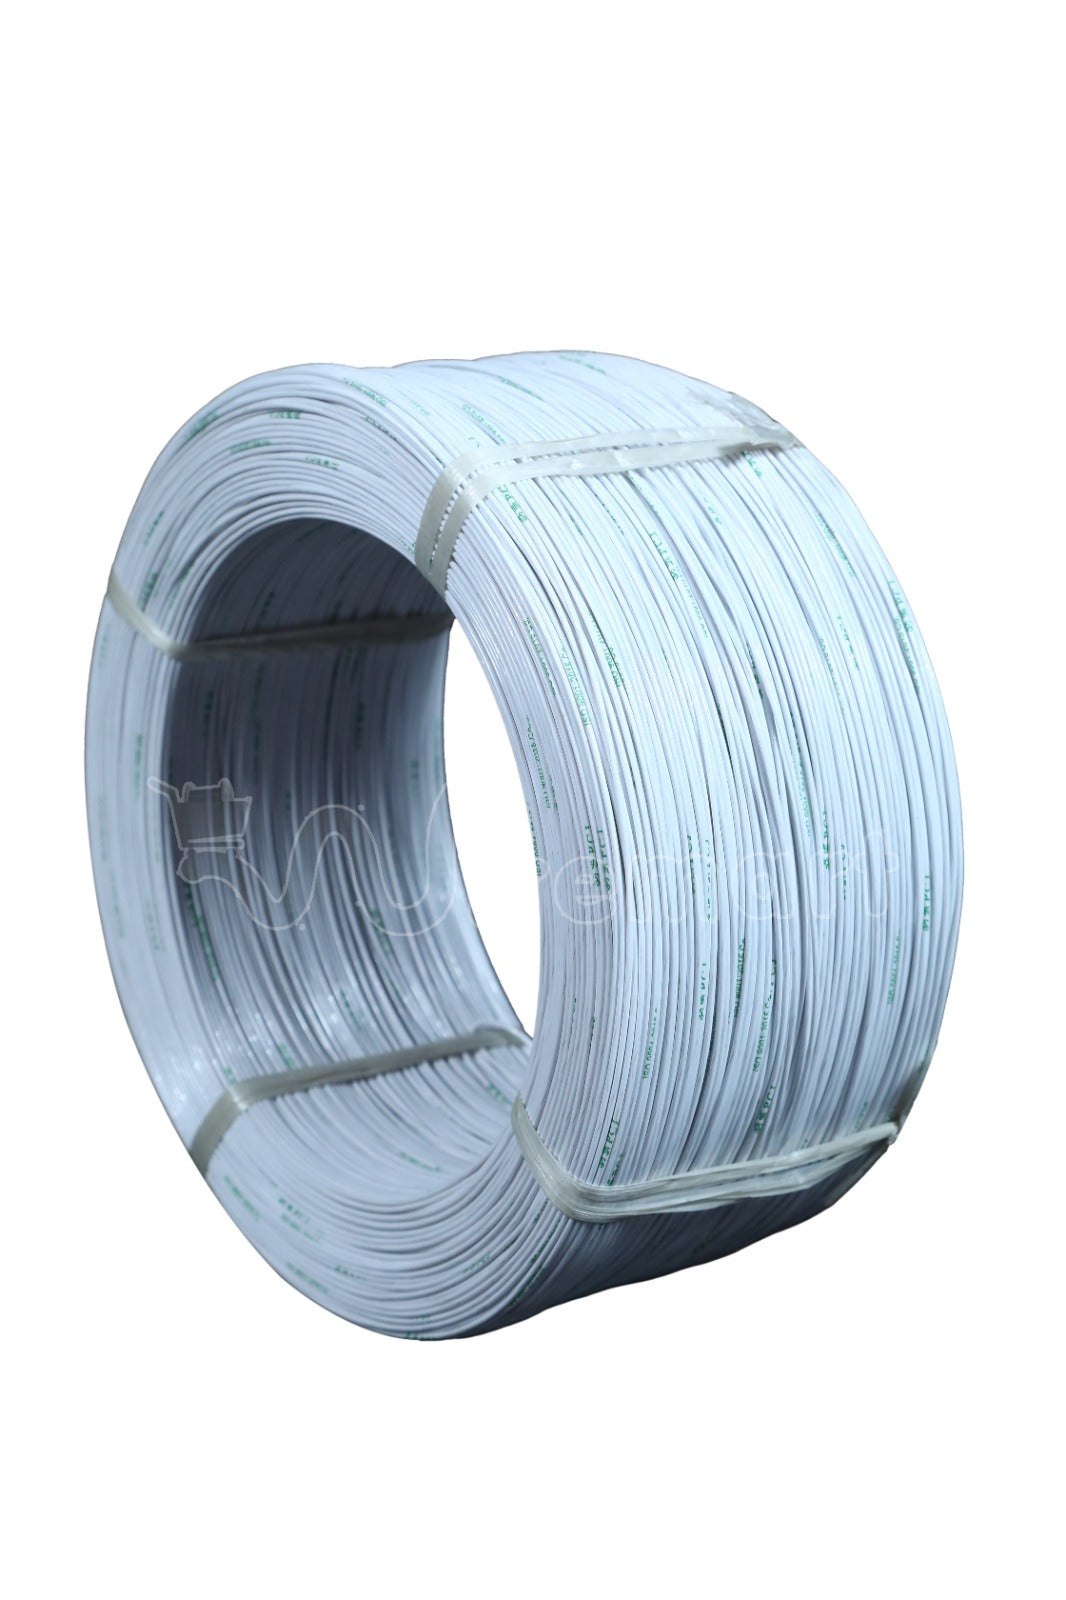 Polystar Gold Submersible Winding Wires